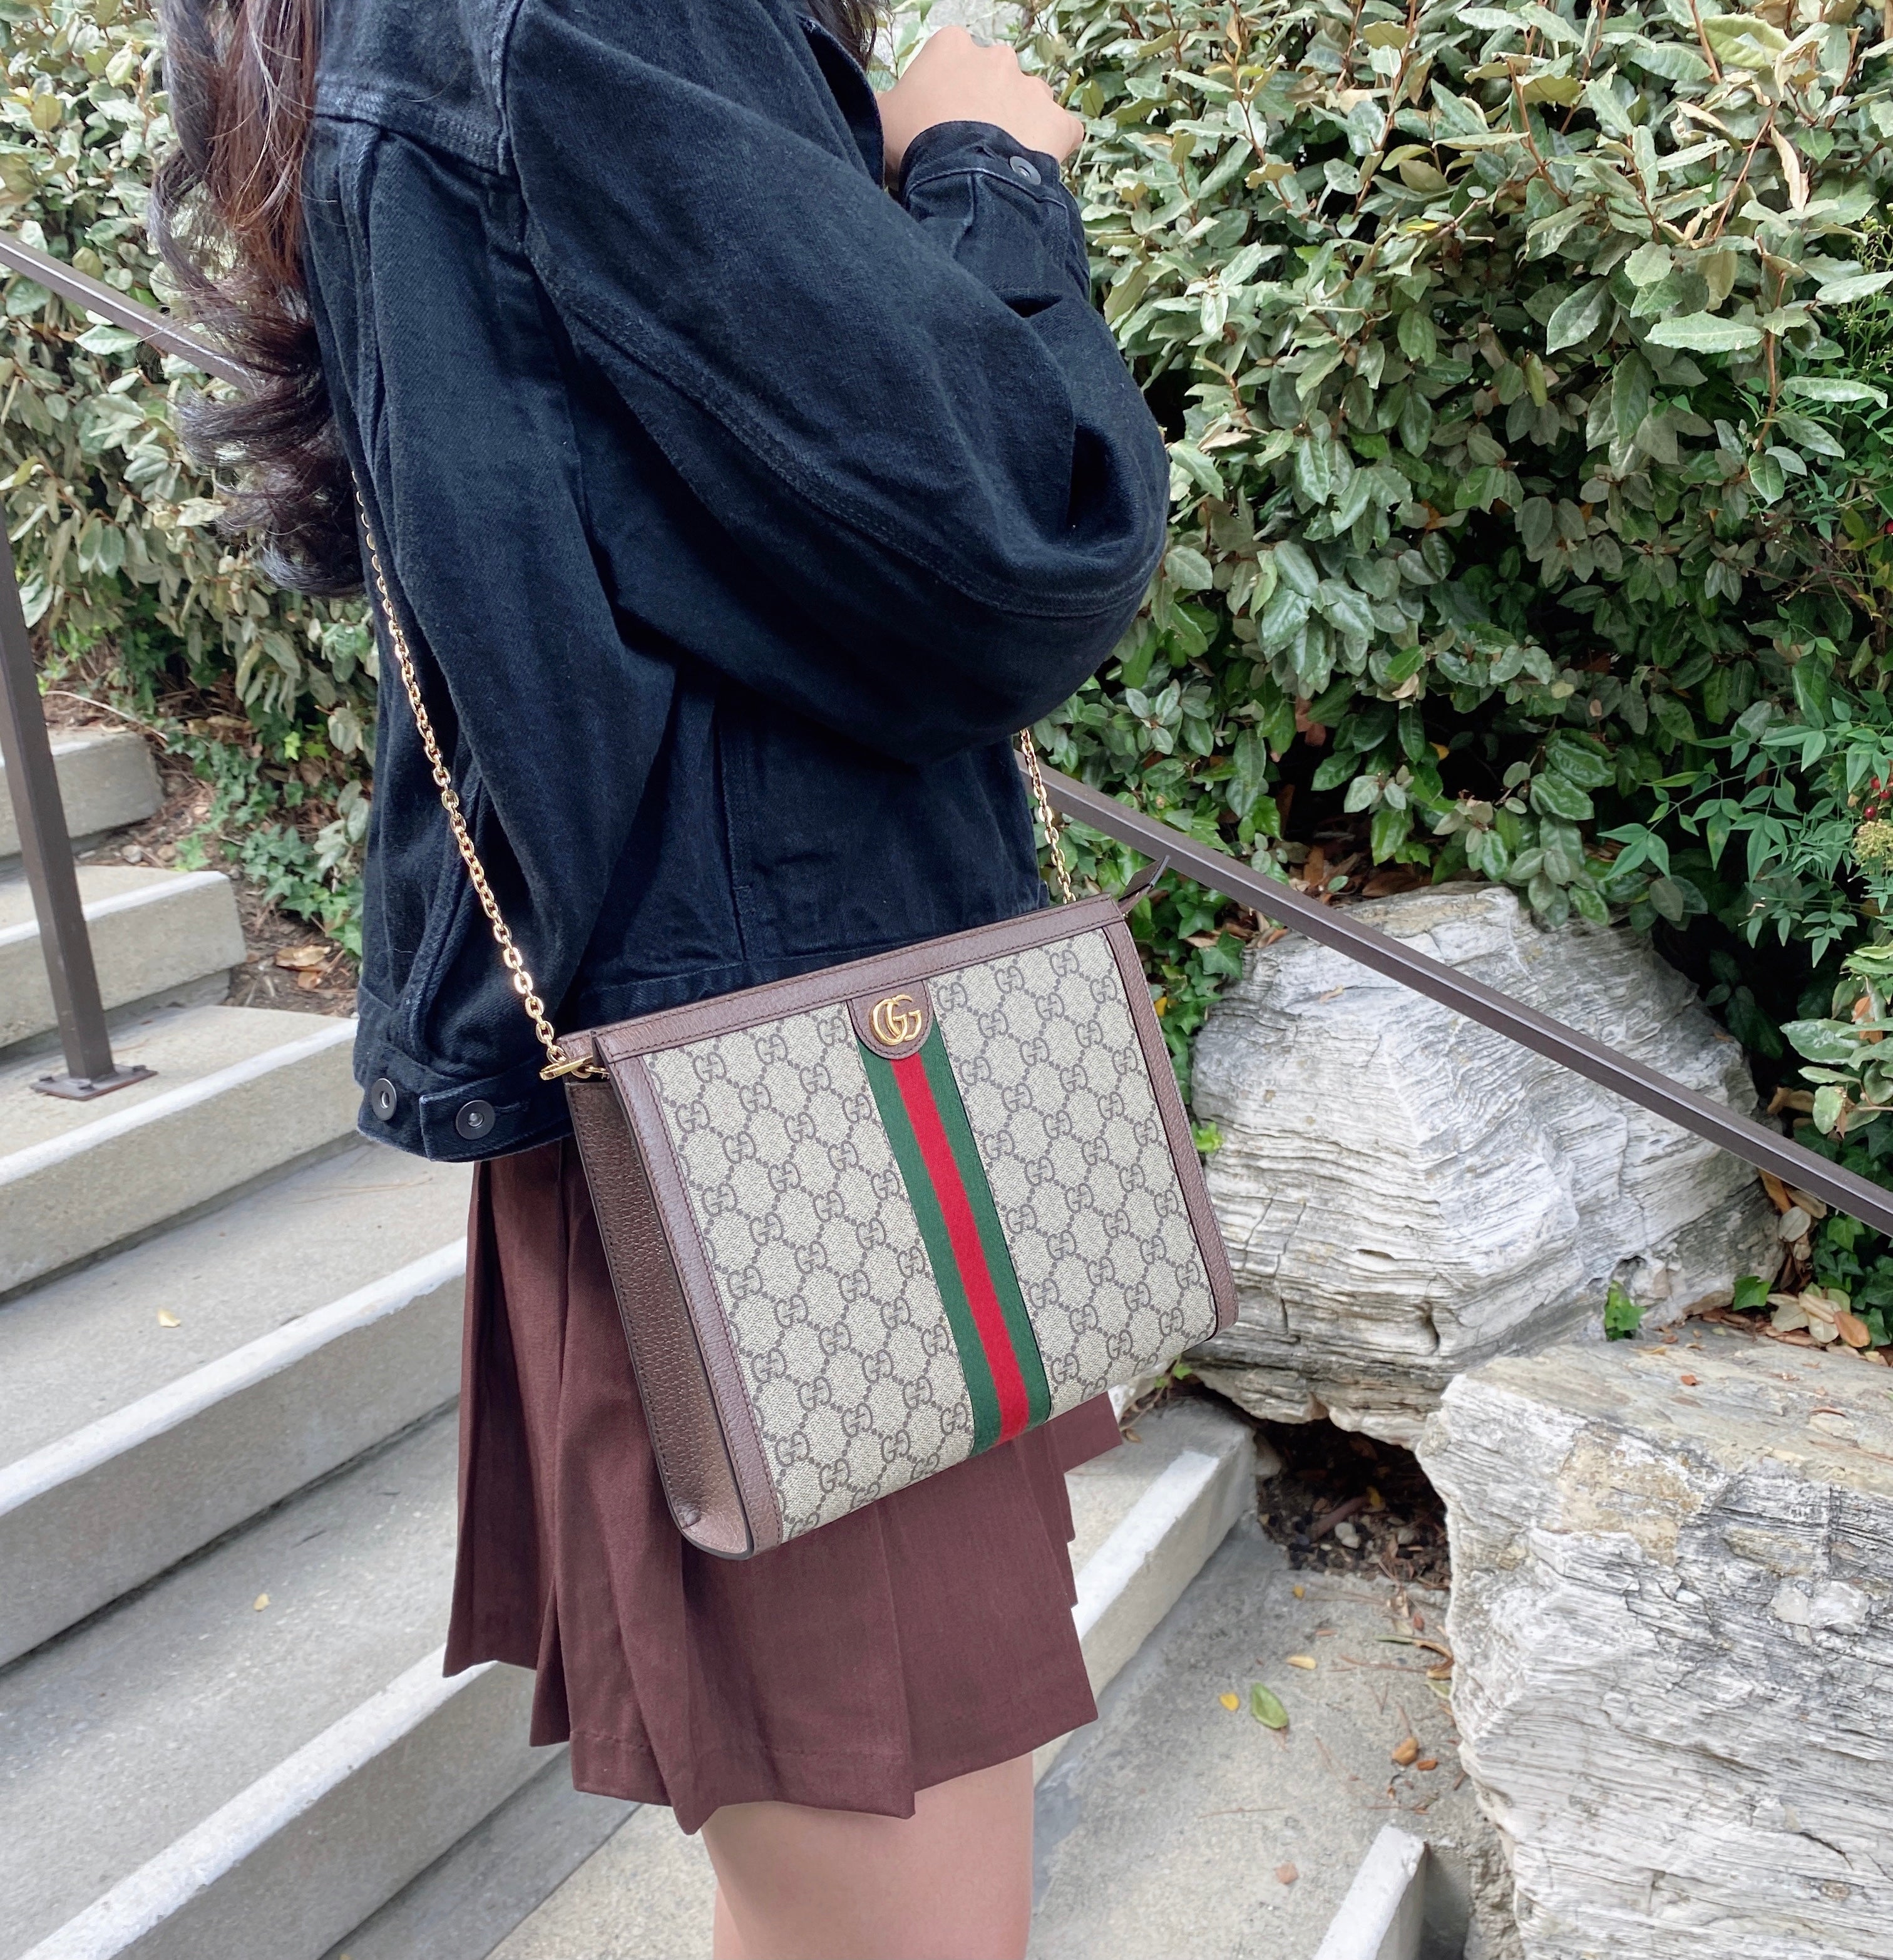 Convert the Gucci Ophidia Pouch to a crossbody with our conversion